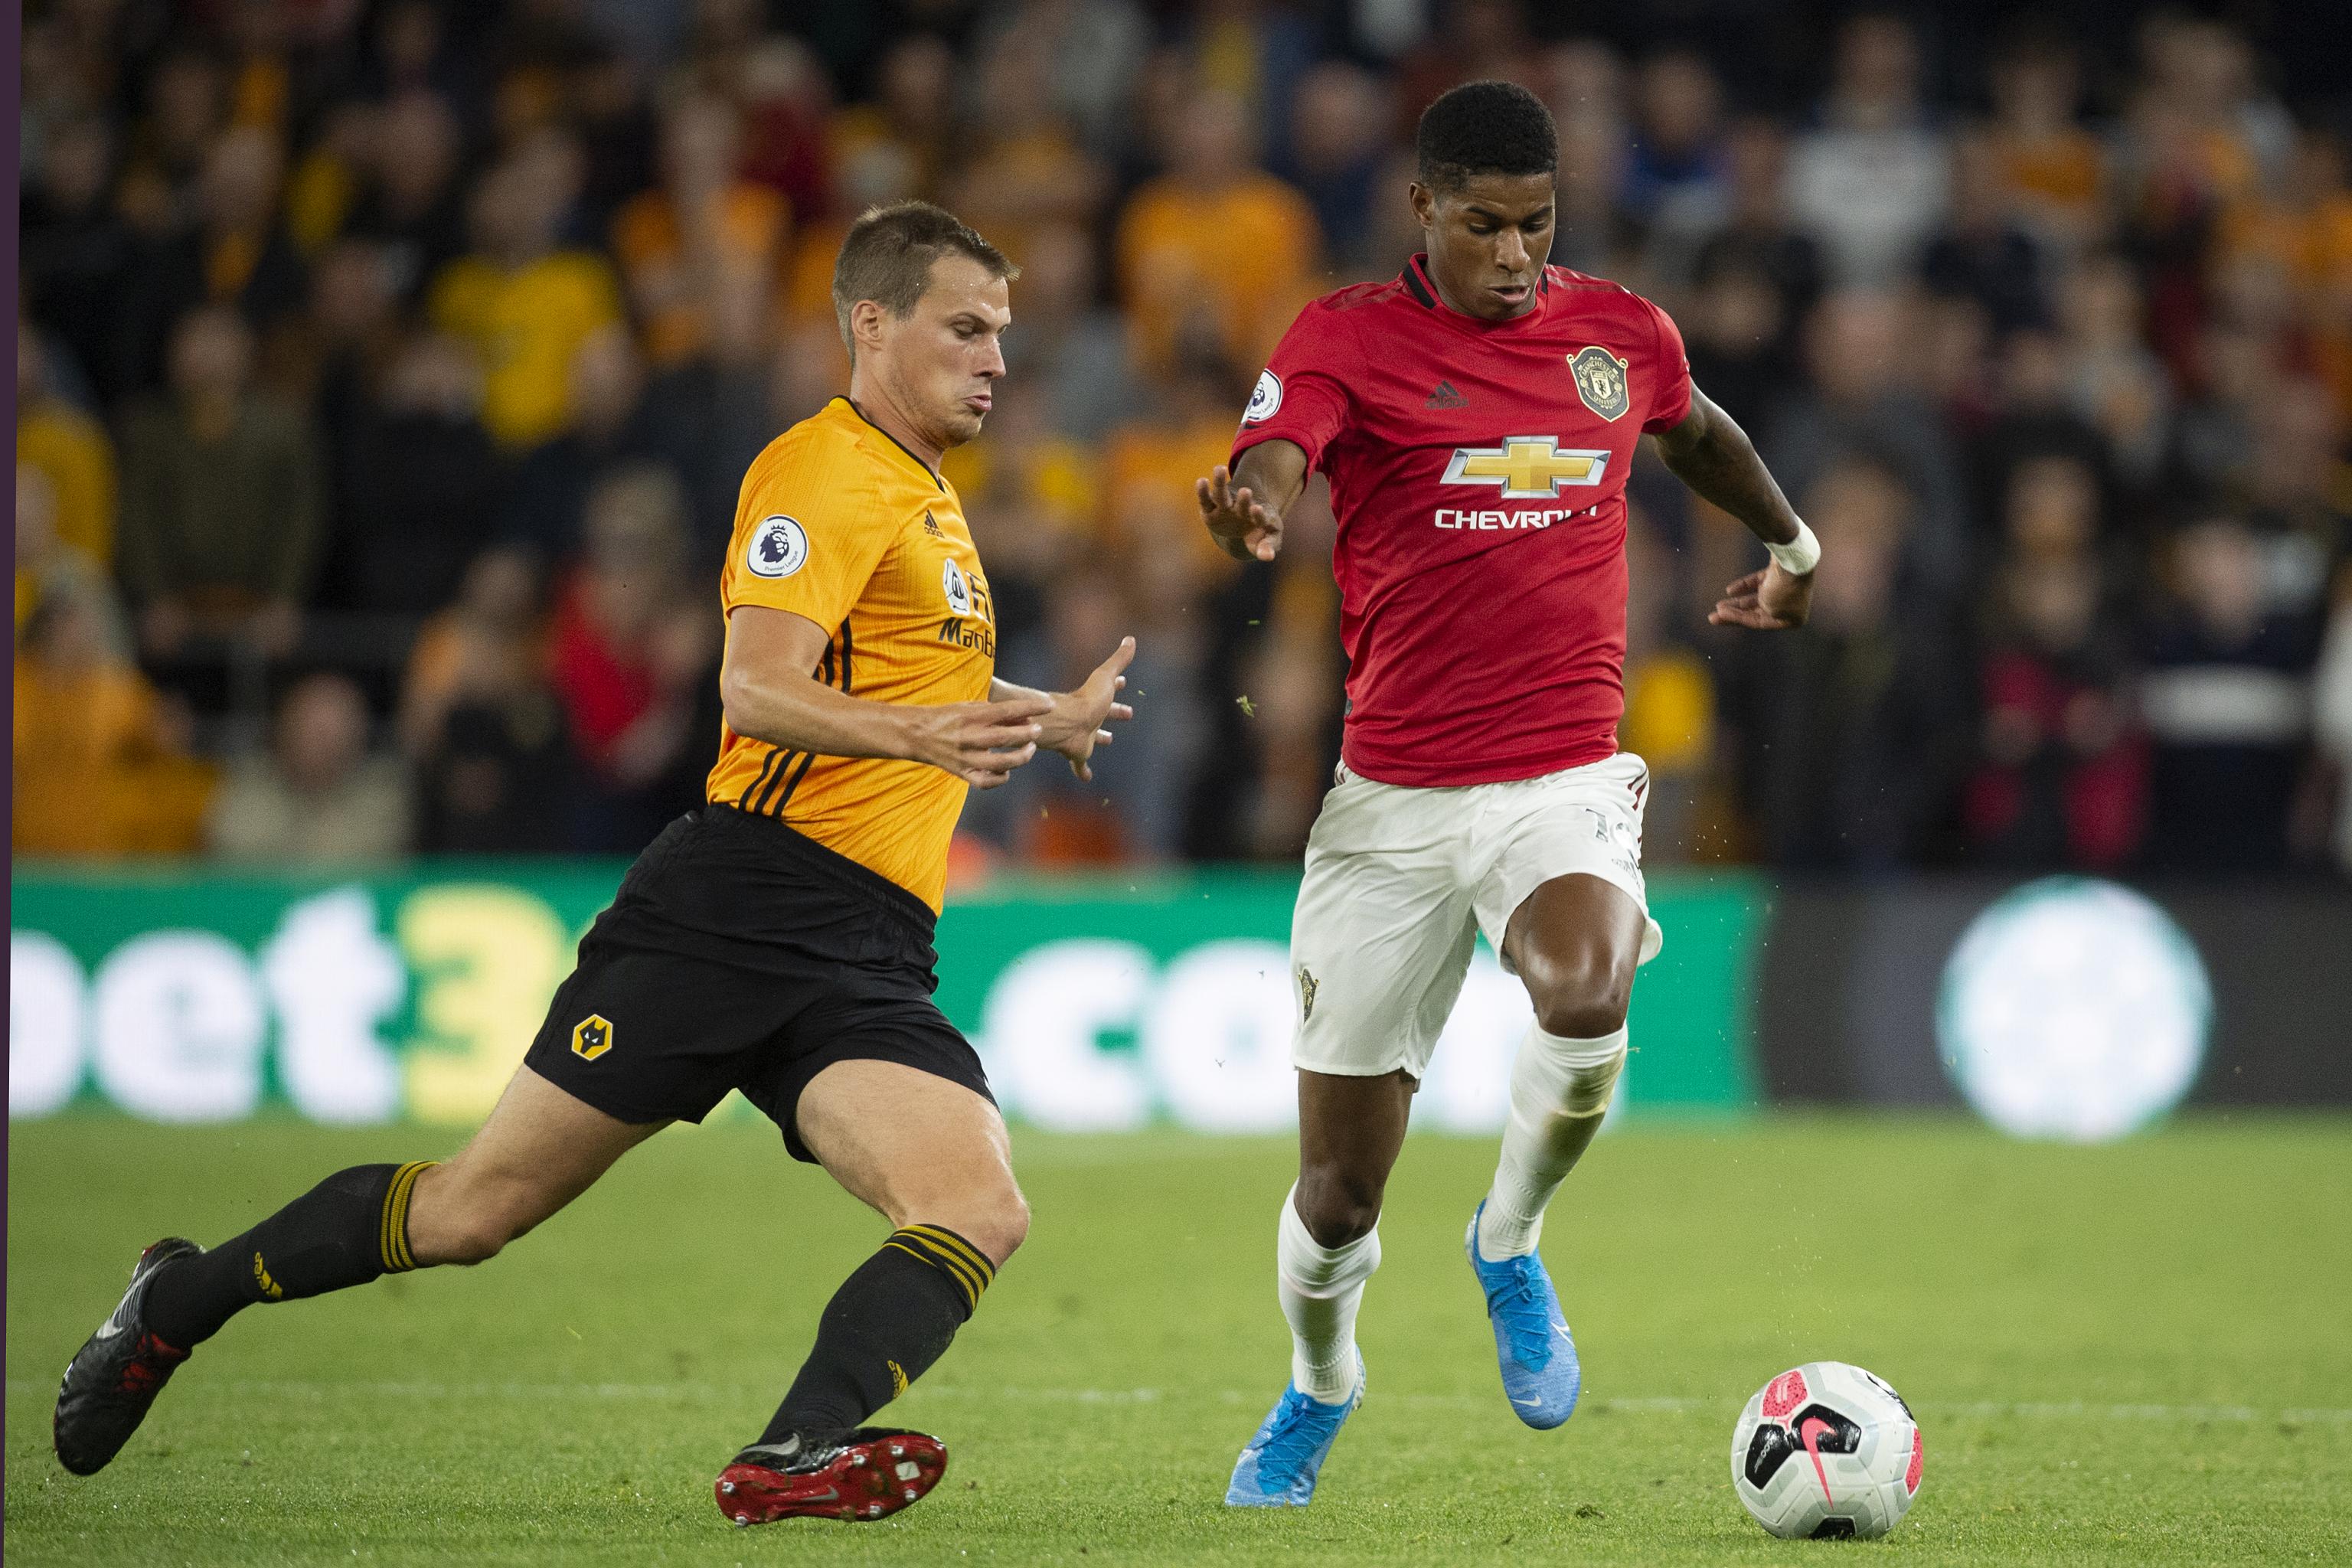 Wolves Vs Manchester United Fa Cup 2020 Odds Live Stream Tv Schedule Bleacher Report Latest News Videos And Highlights